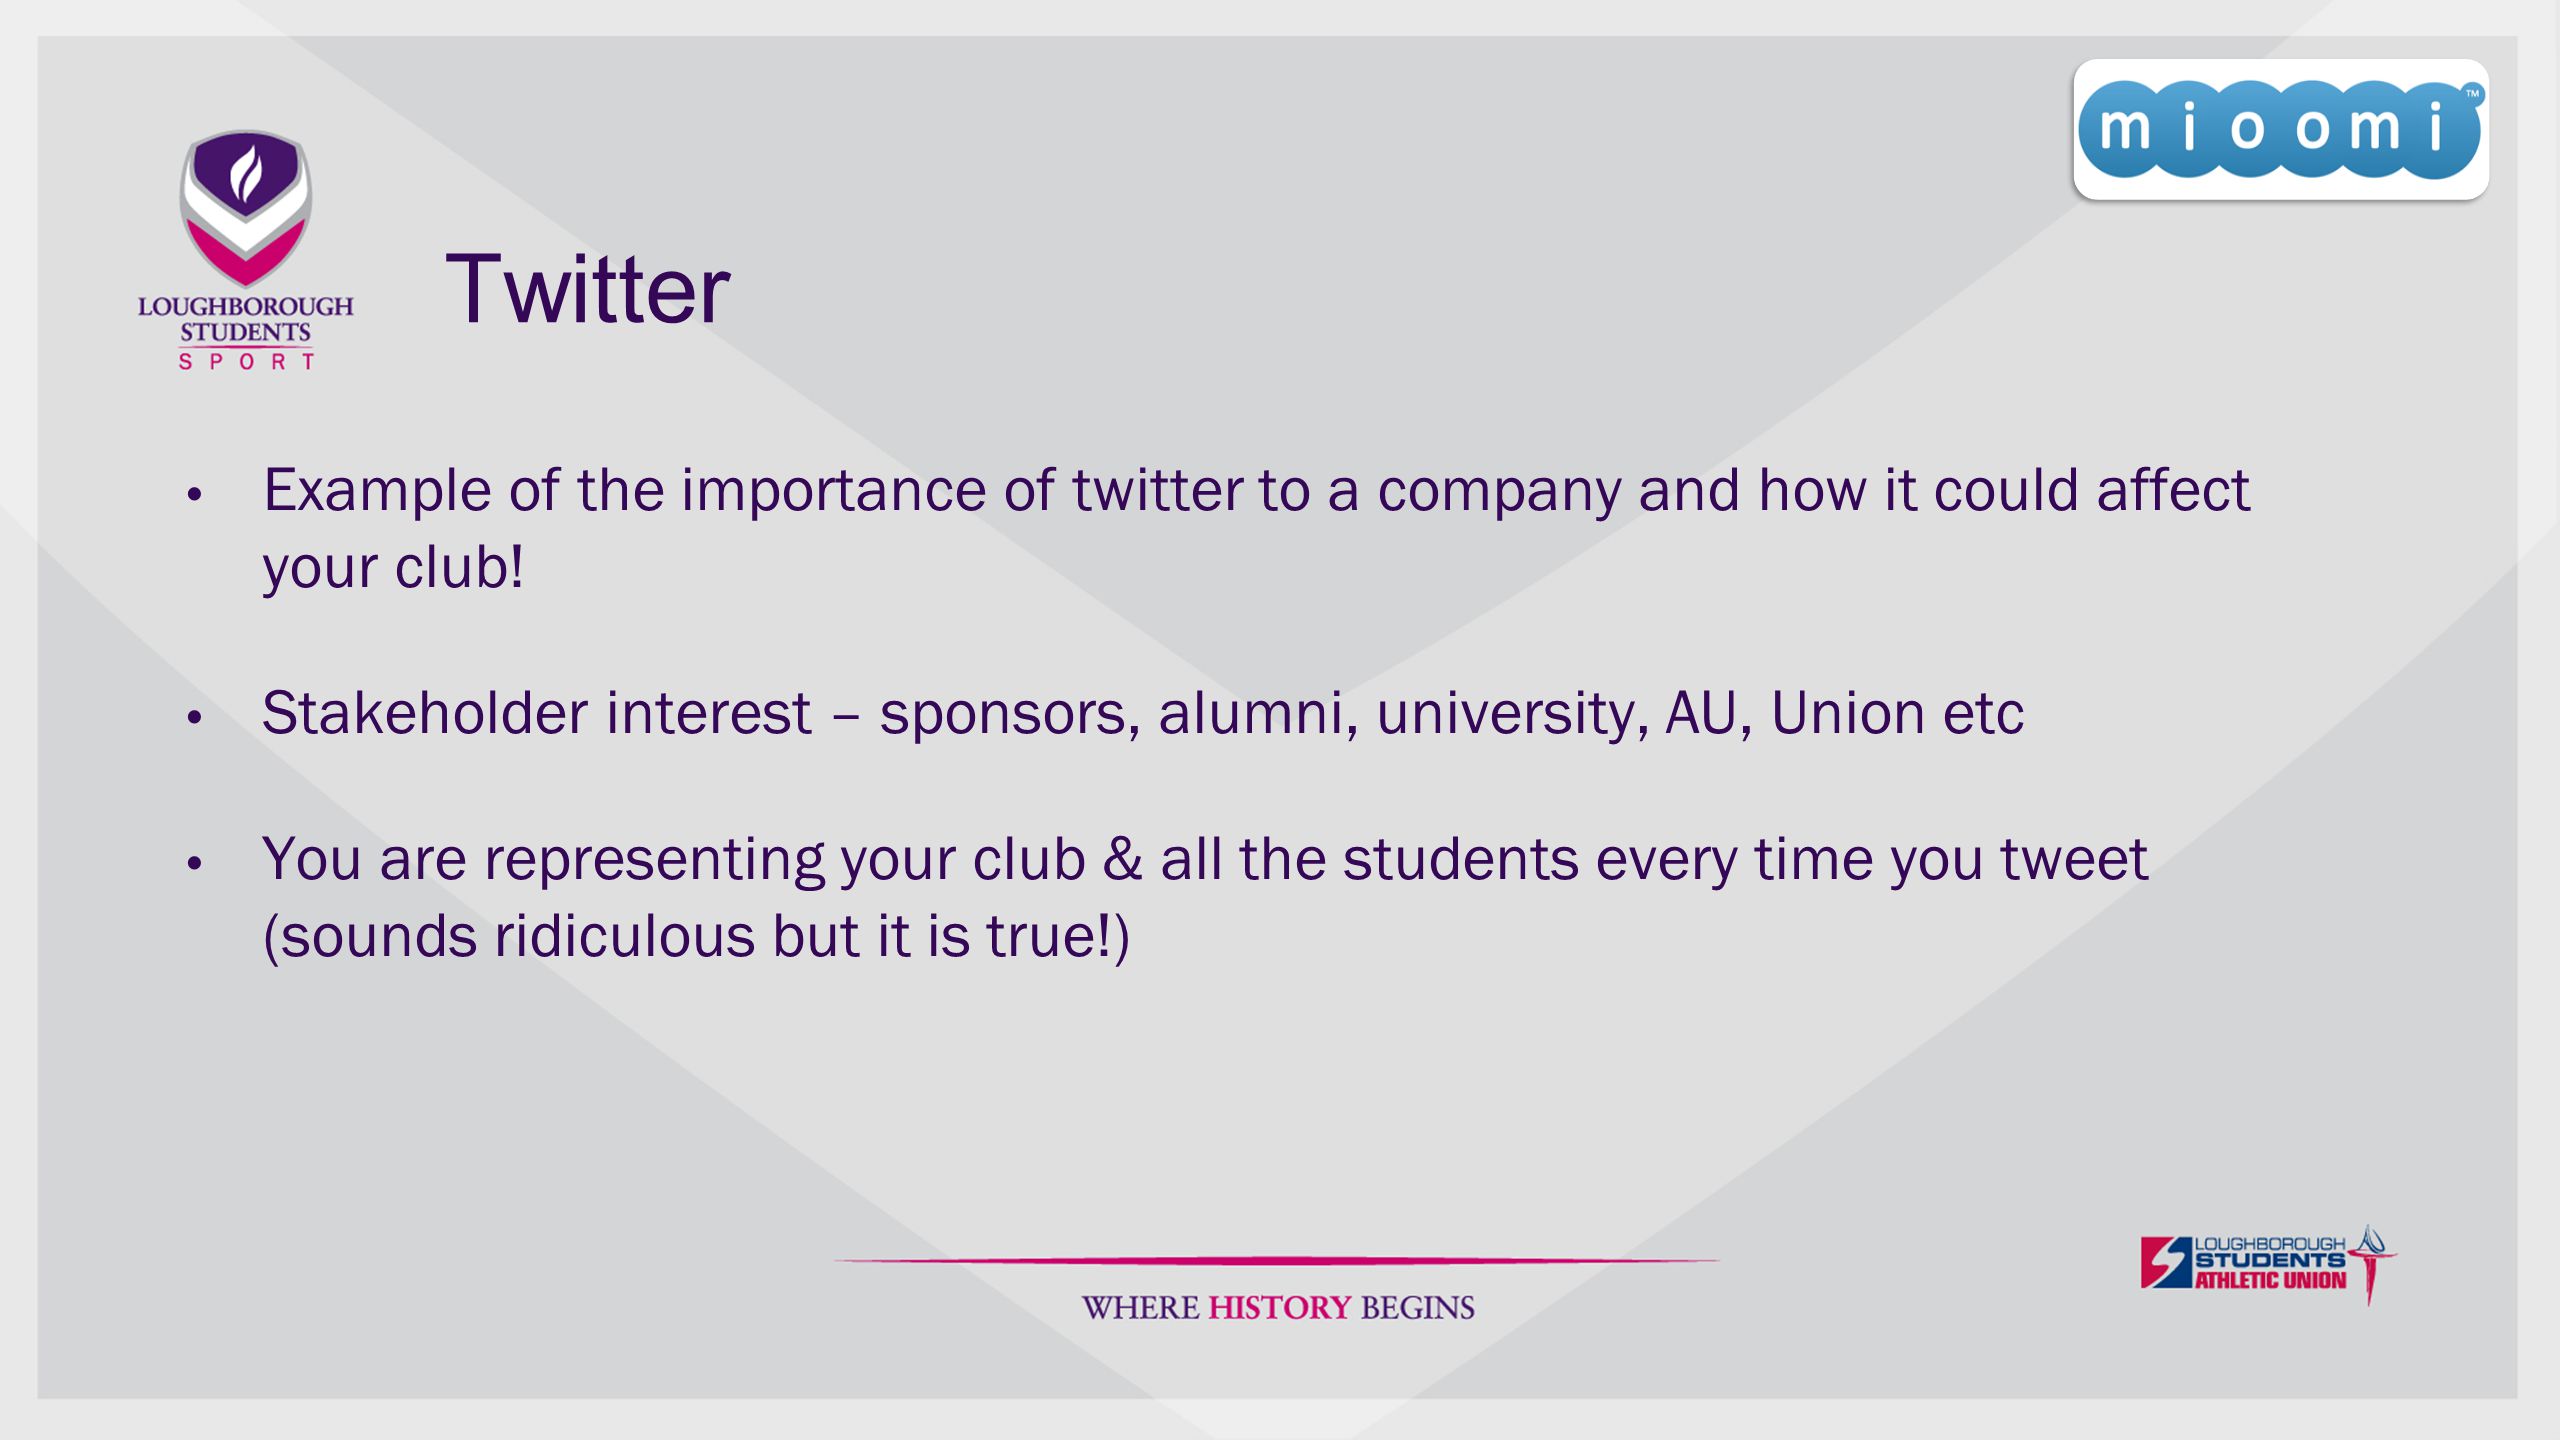 Twitter Example of the importance of twitter to a company and how it could affect your club.